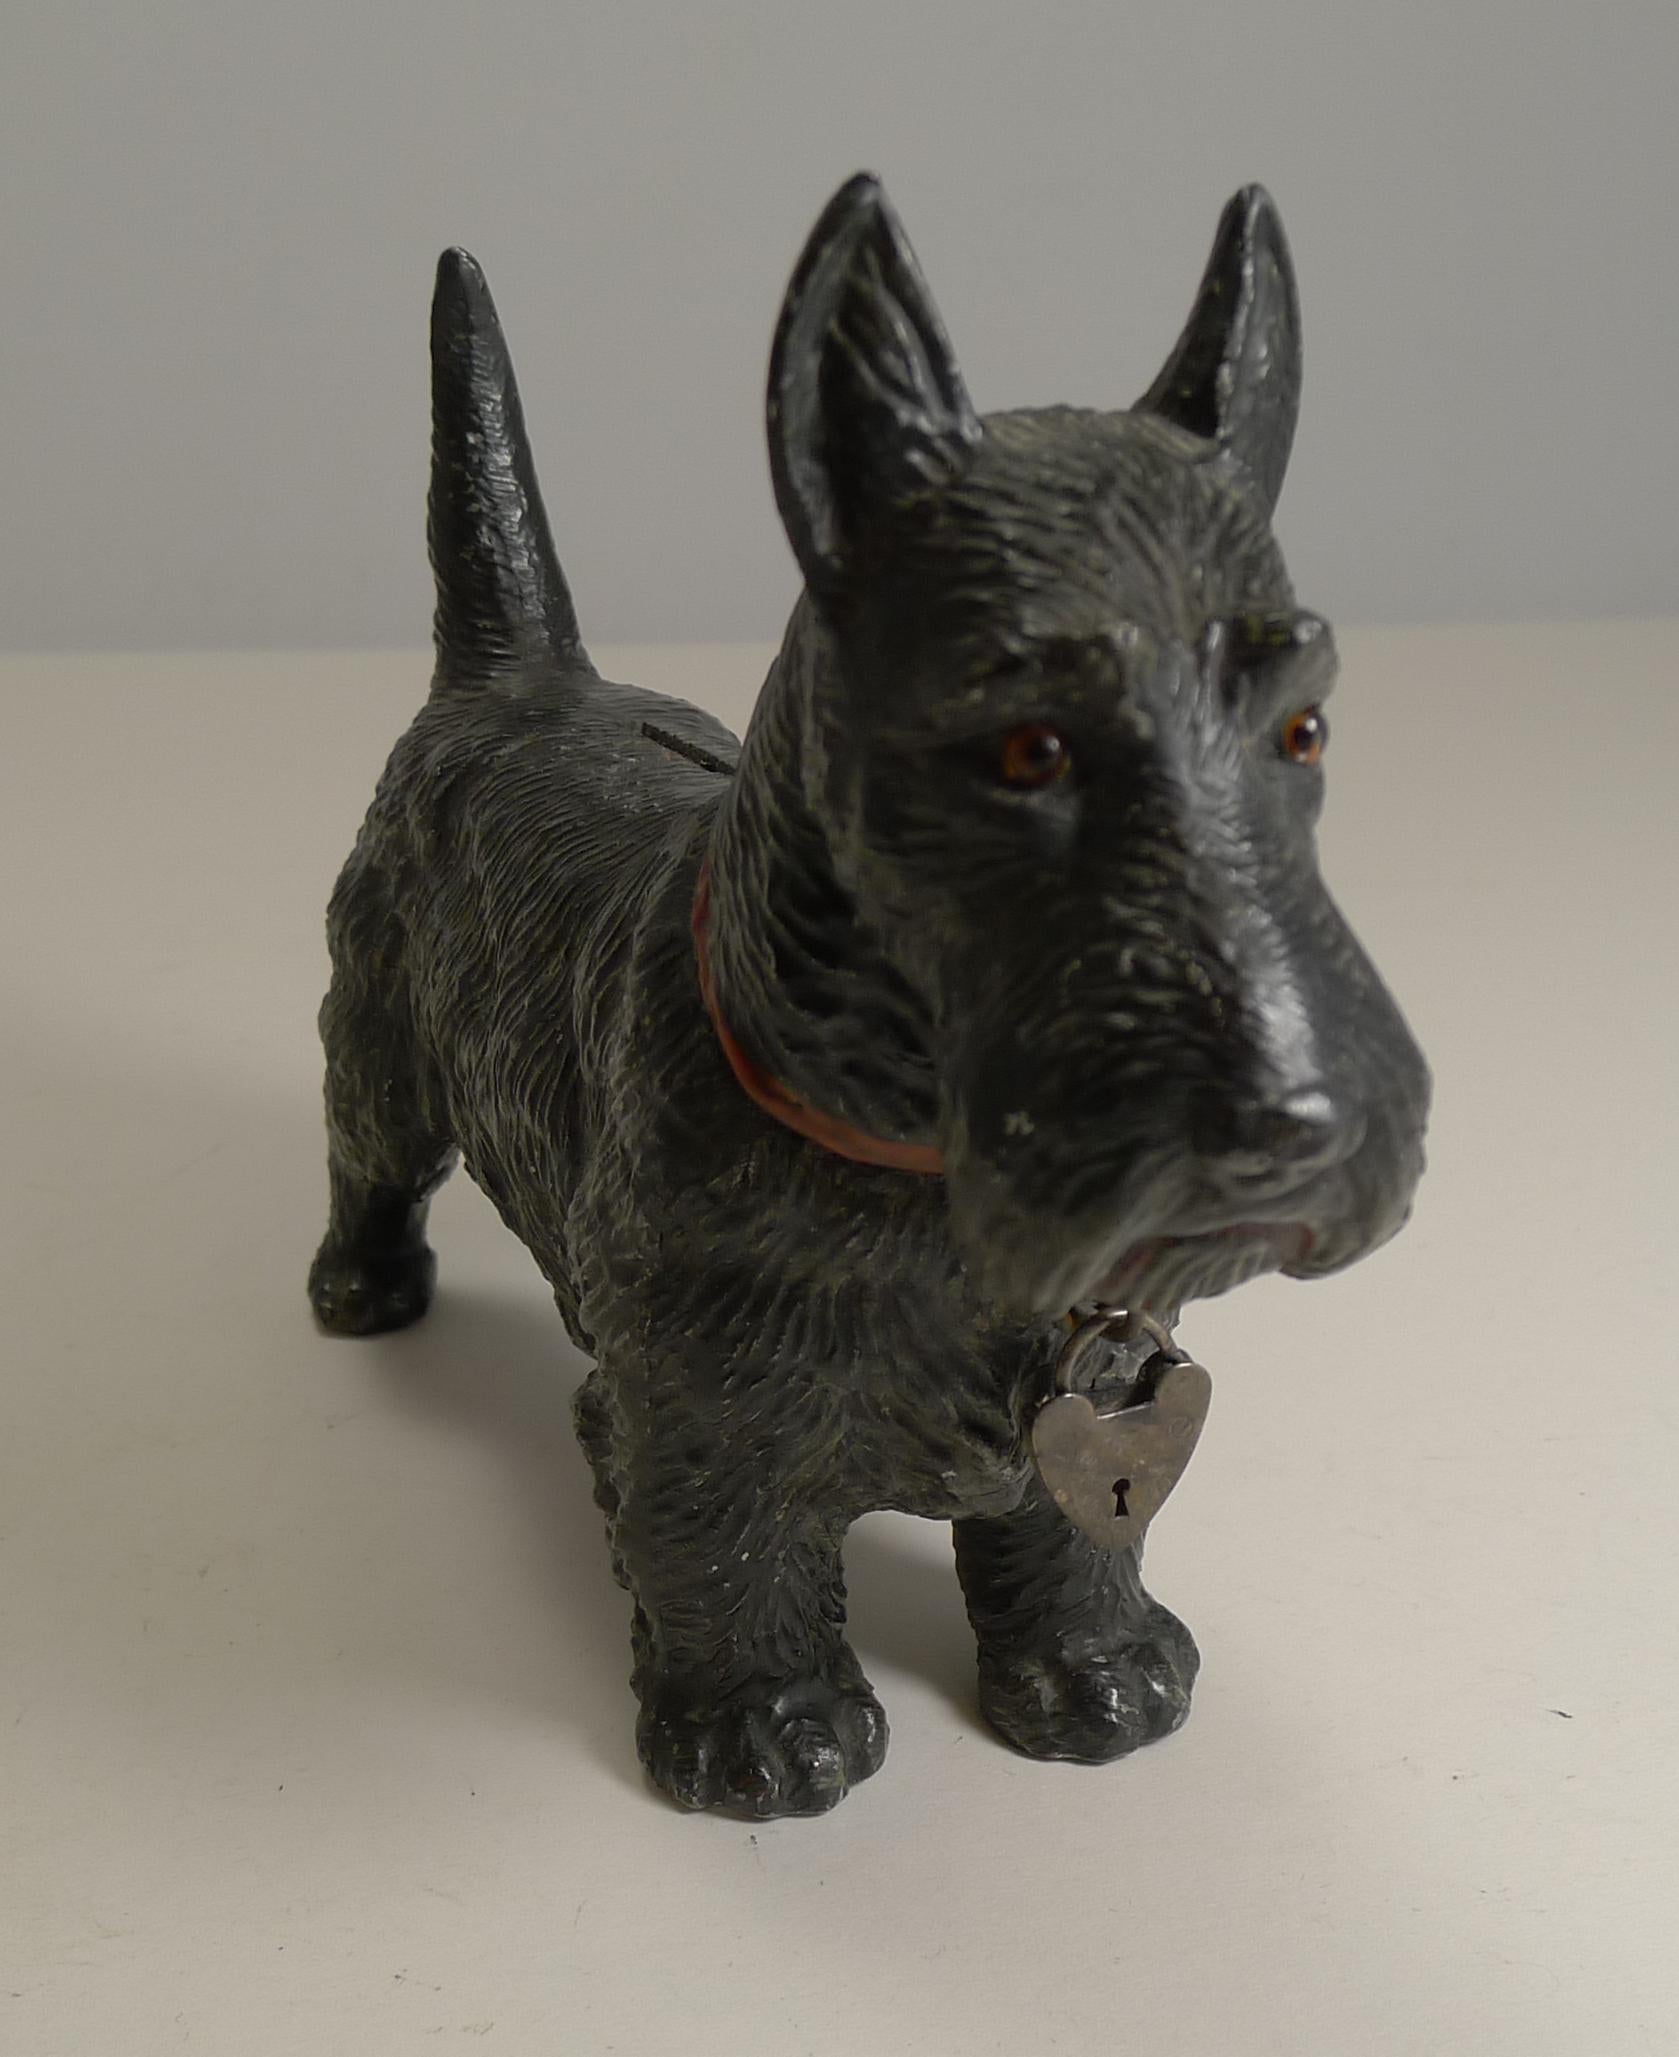 A charming and highly collectable Scottie dog money box or bank.

Made from spelter, the dog is painted including a charming little red collar. There is a slot at the top for coins to be inserted and then can be removed from the hinged head of the